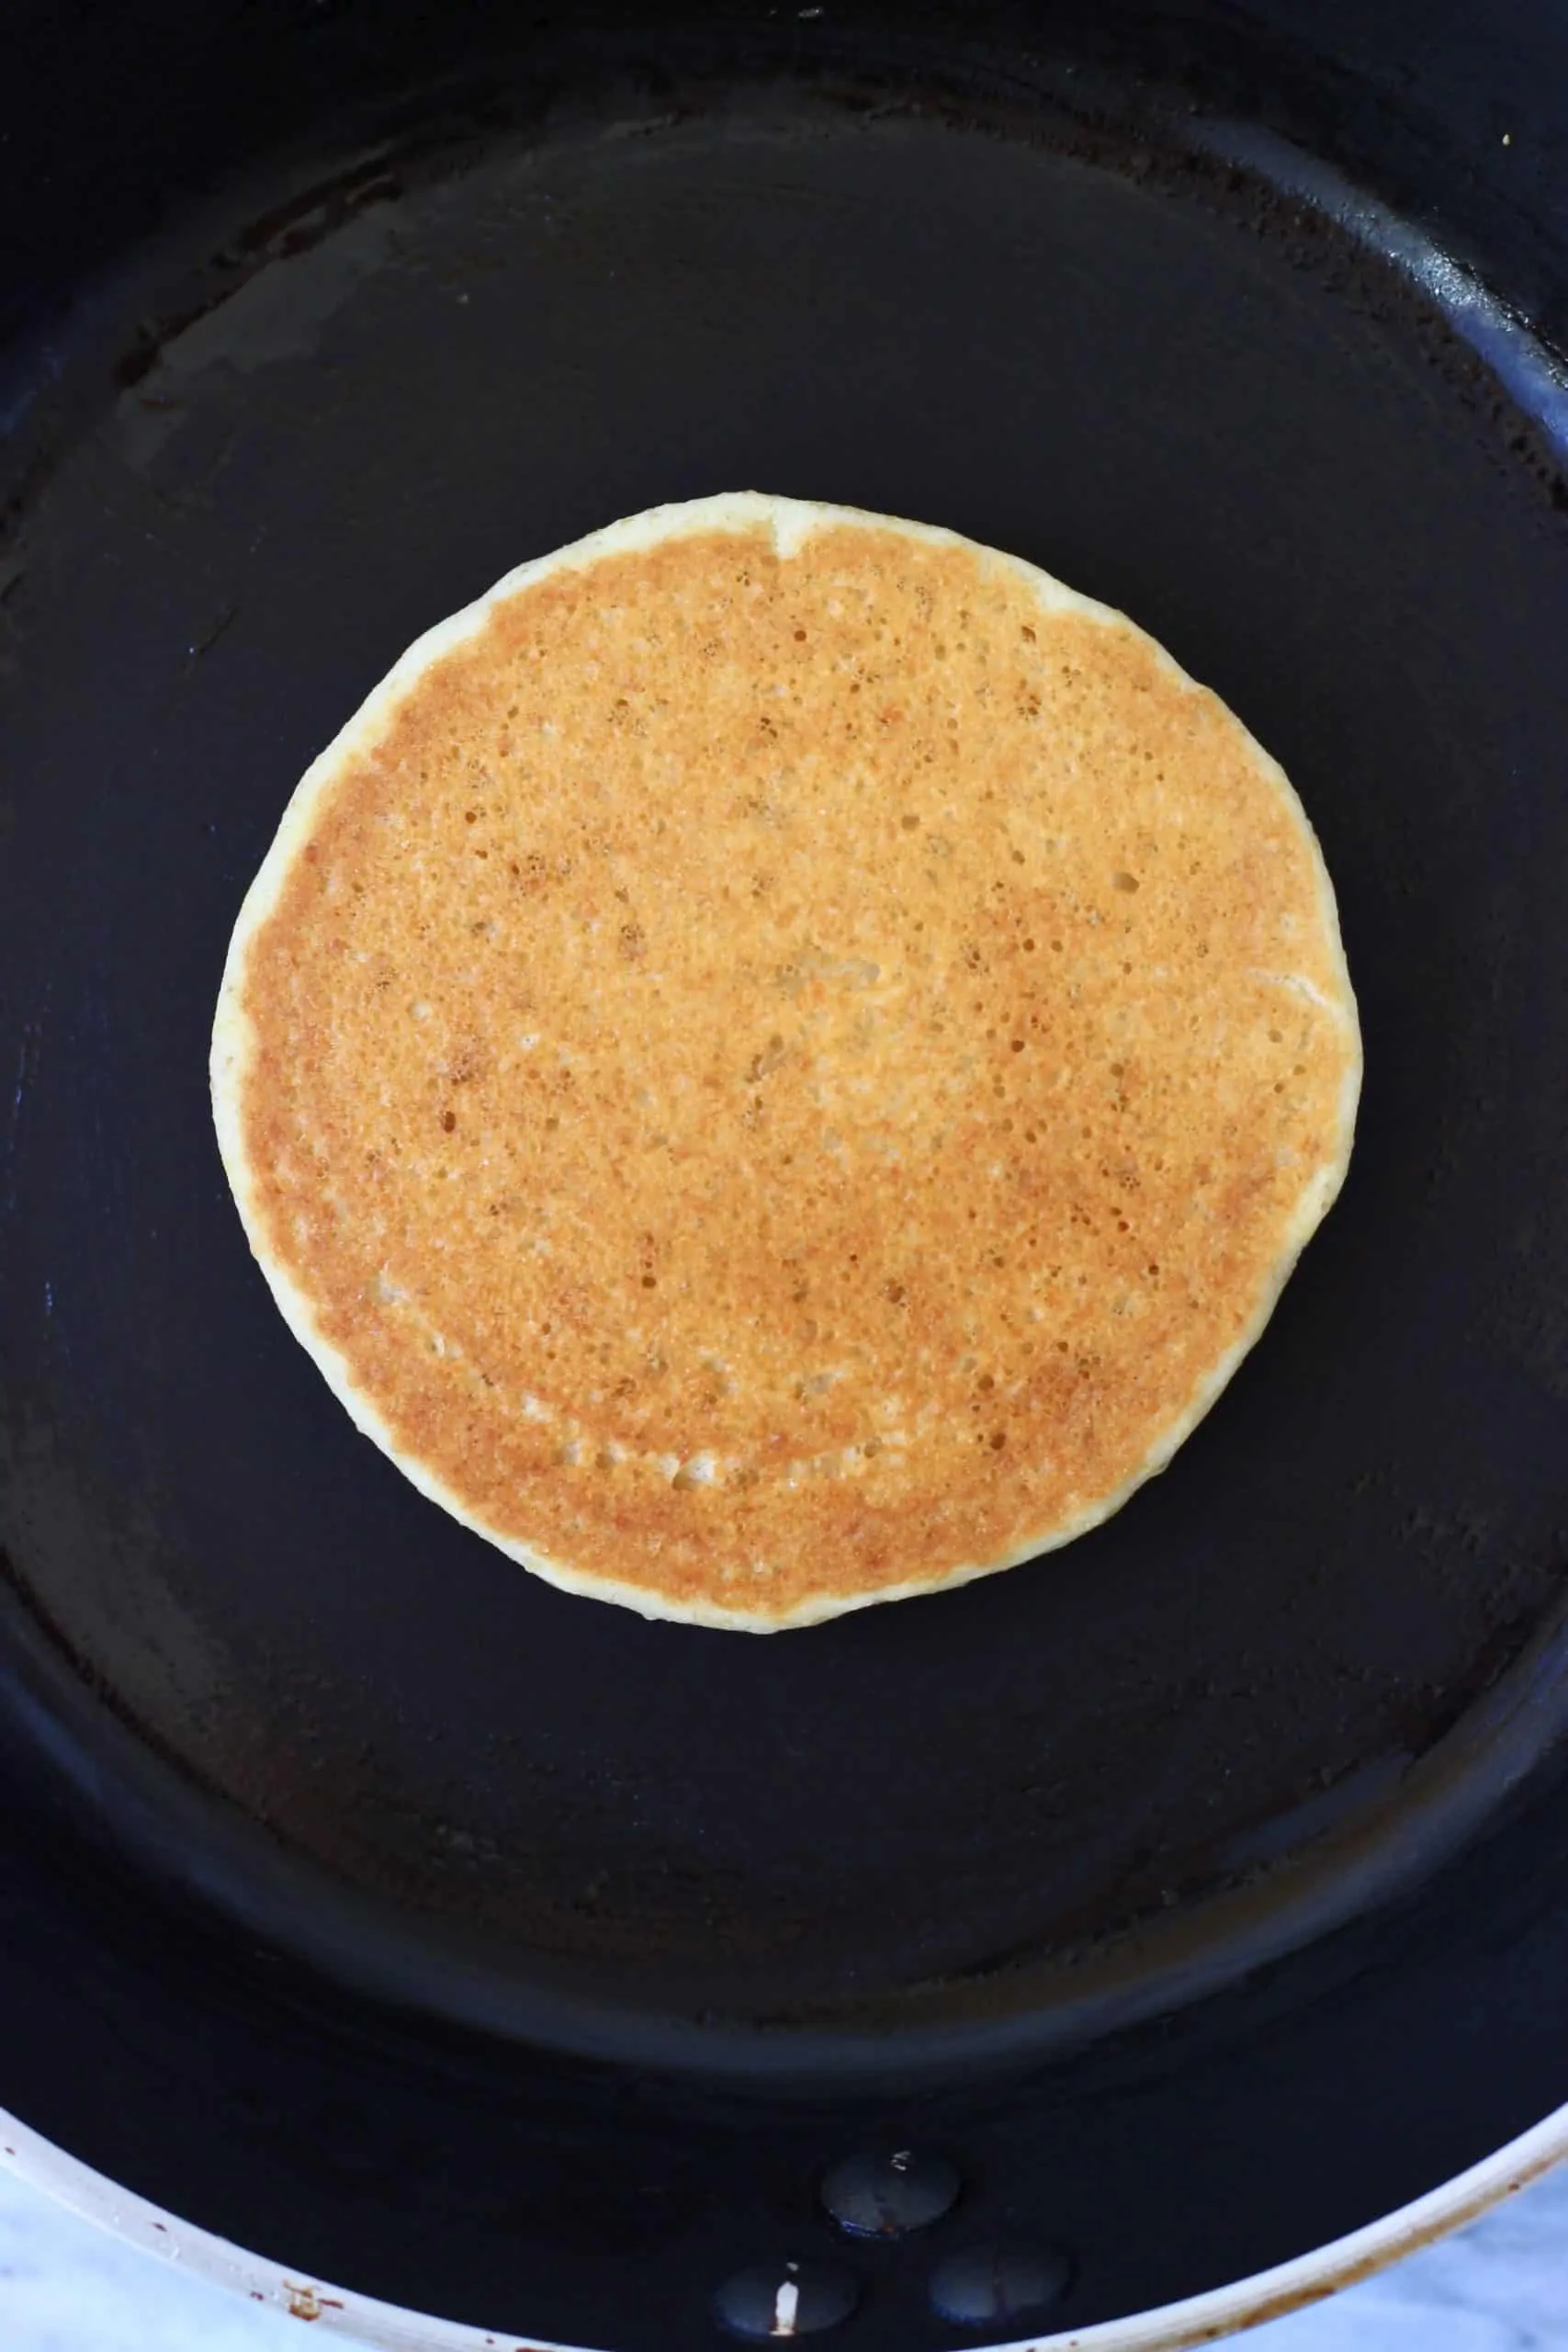 A golden brown flaxseed pancake in a black frying pan